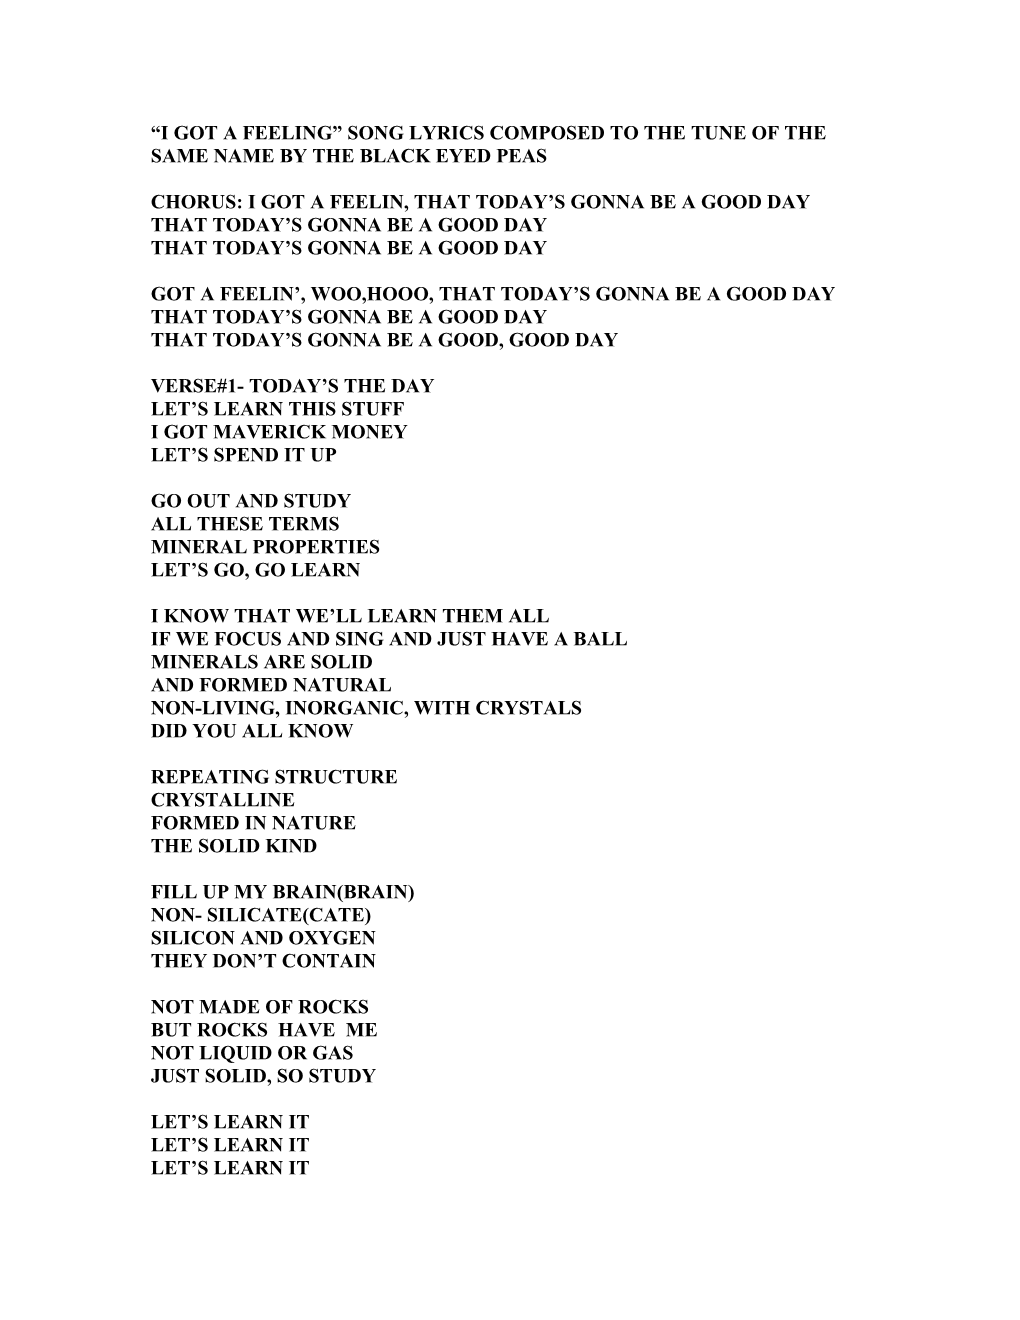 I Got a Feeling Song Lyrics Composed to the Tune of the Same Name by the Black Eyed Peas